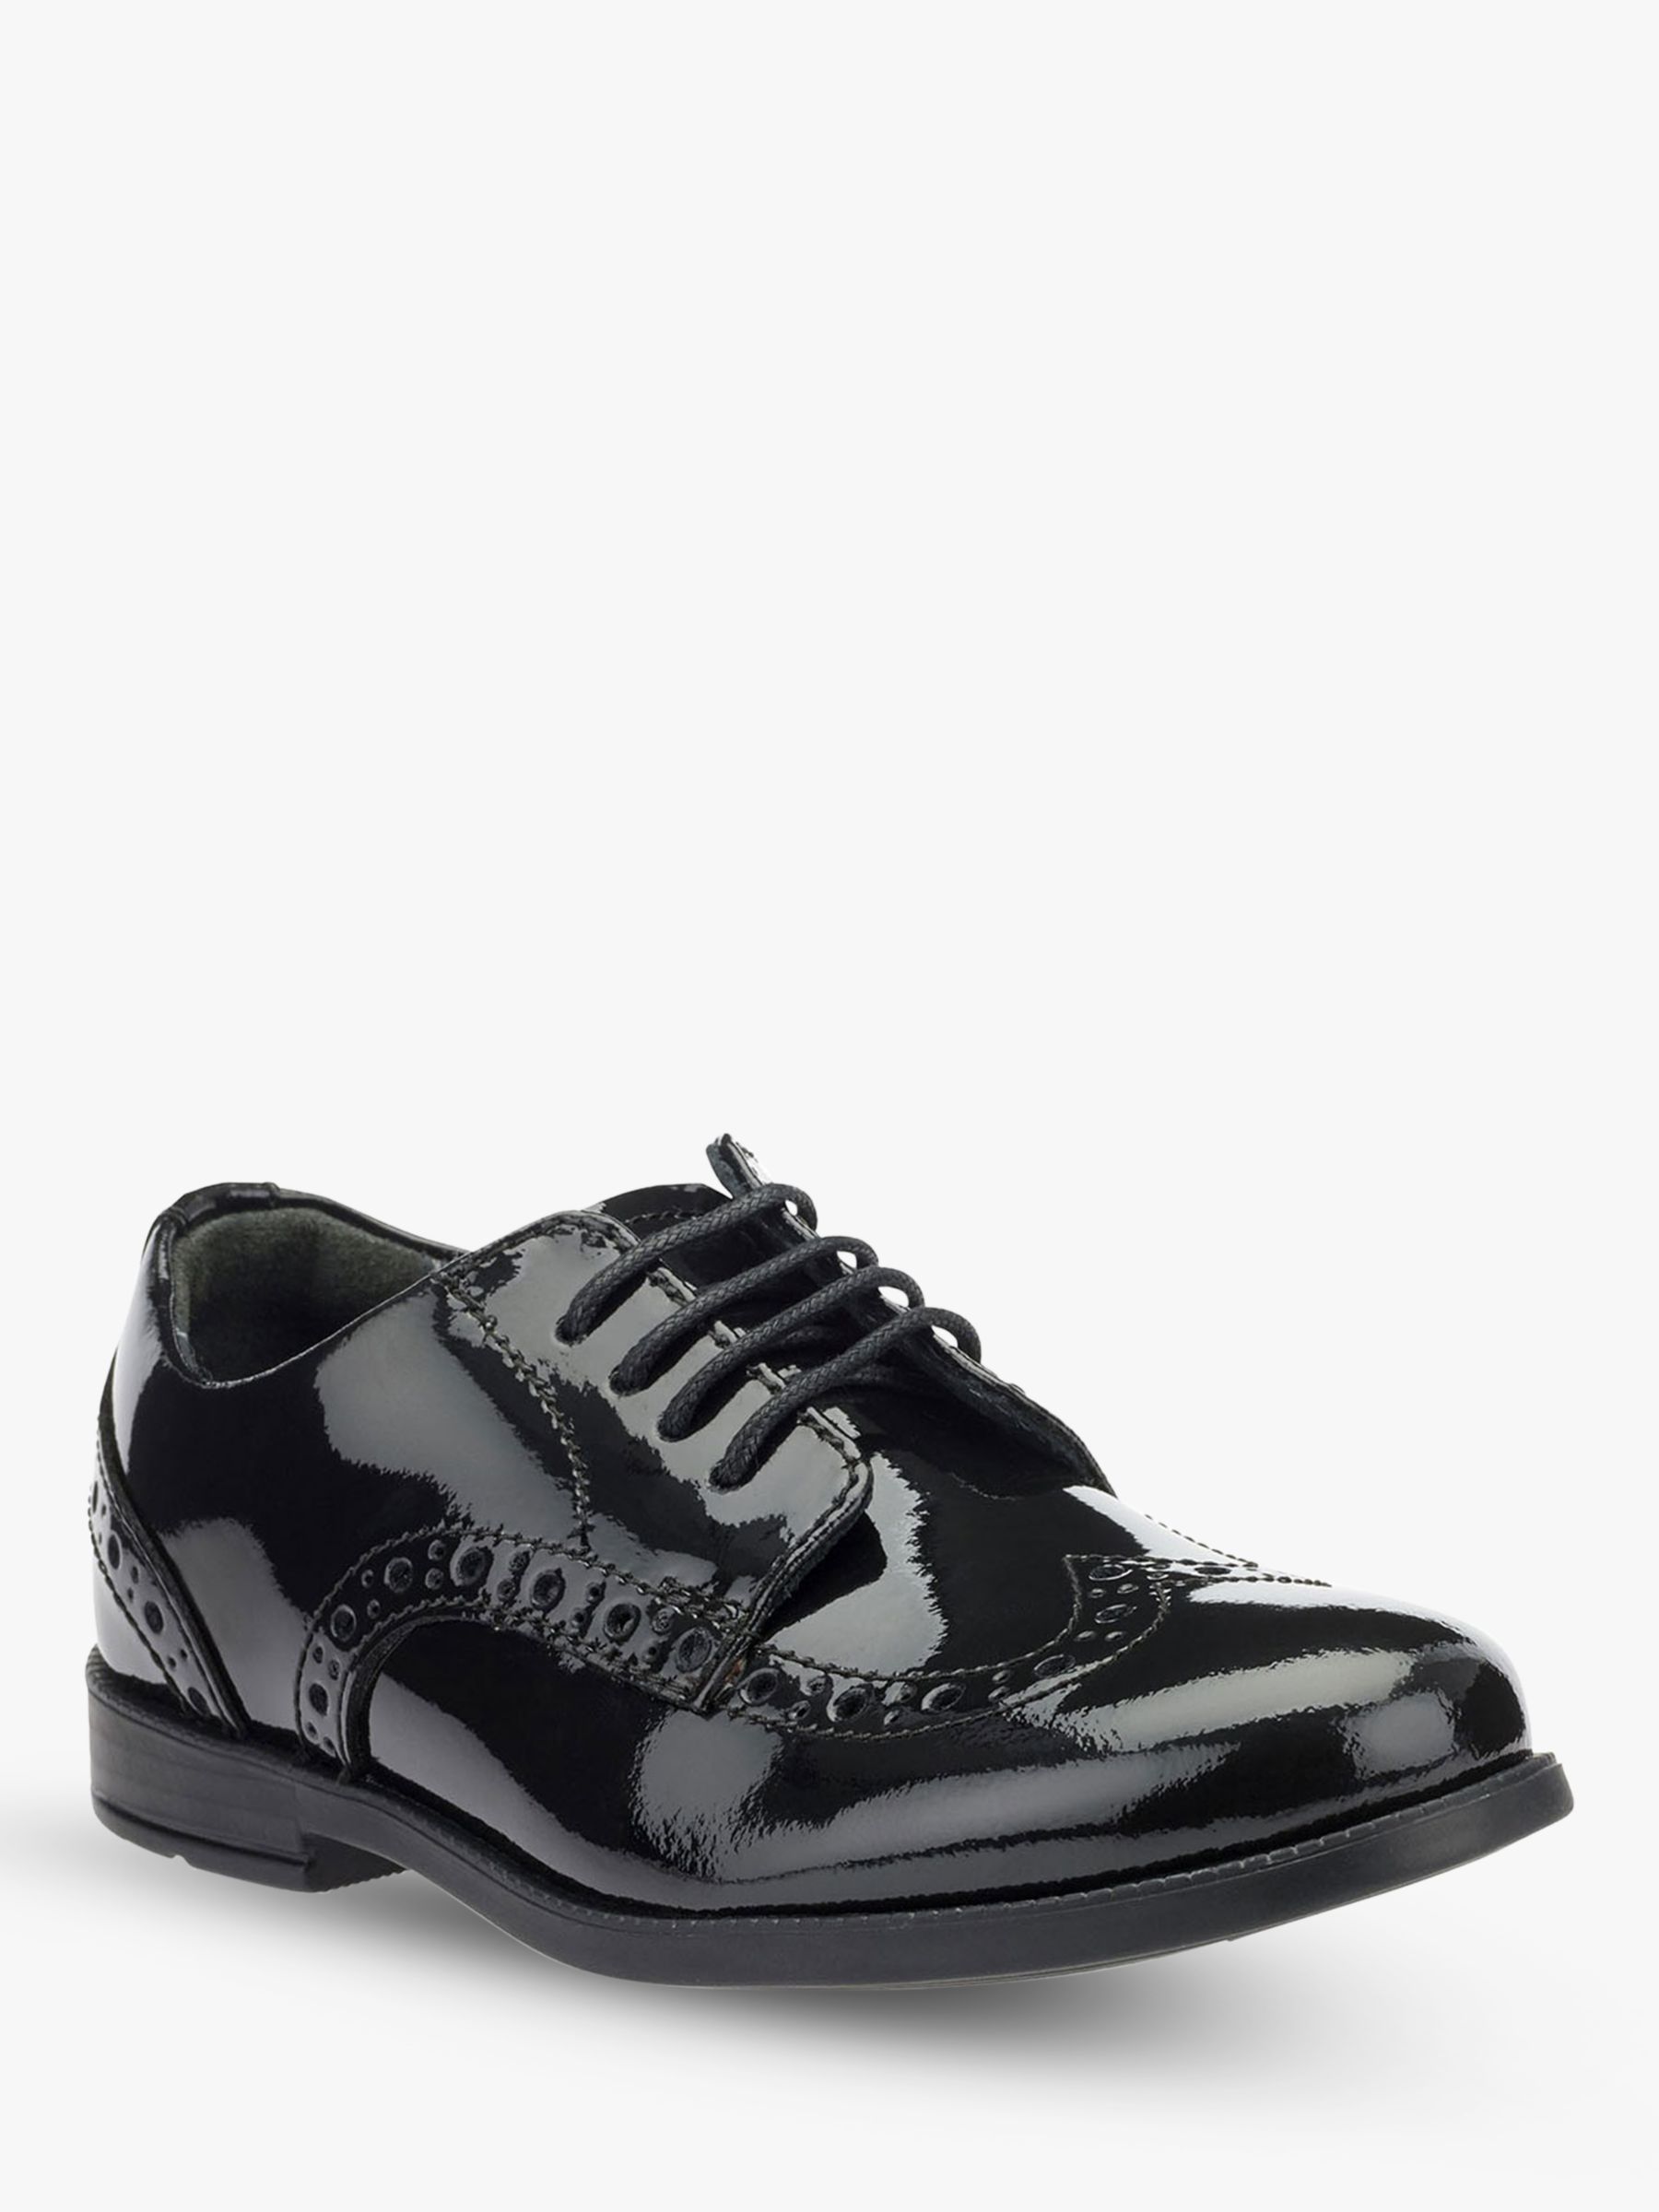 Buy Start-Rite Kids' Leather Brogue Shoes Online at johnlewis.com